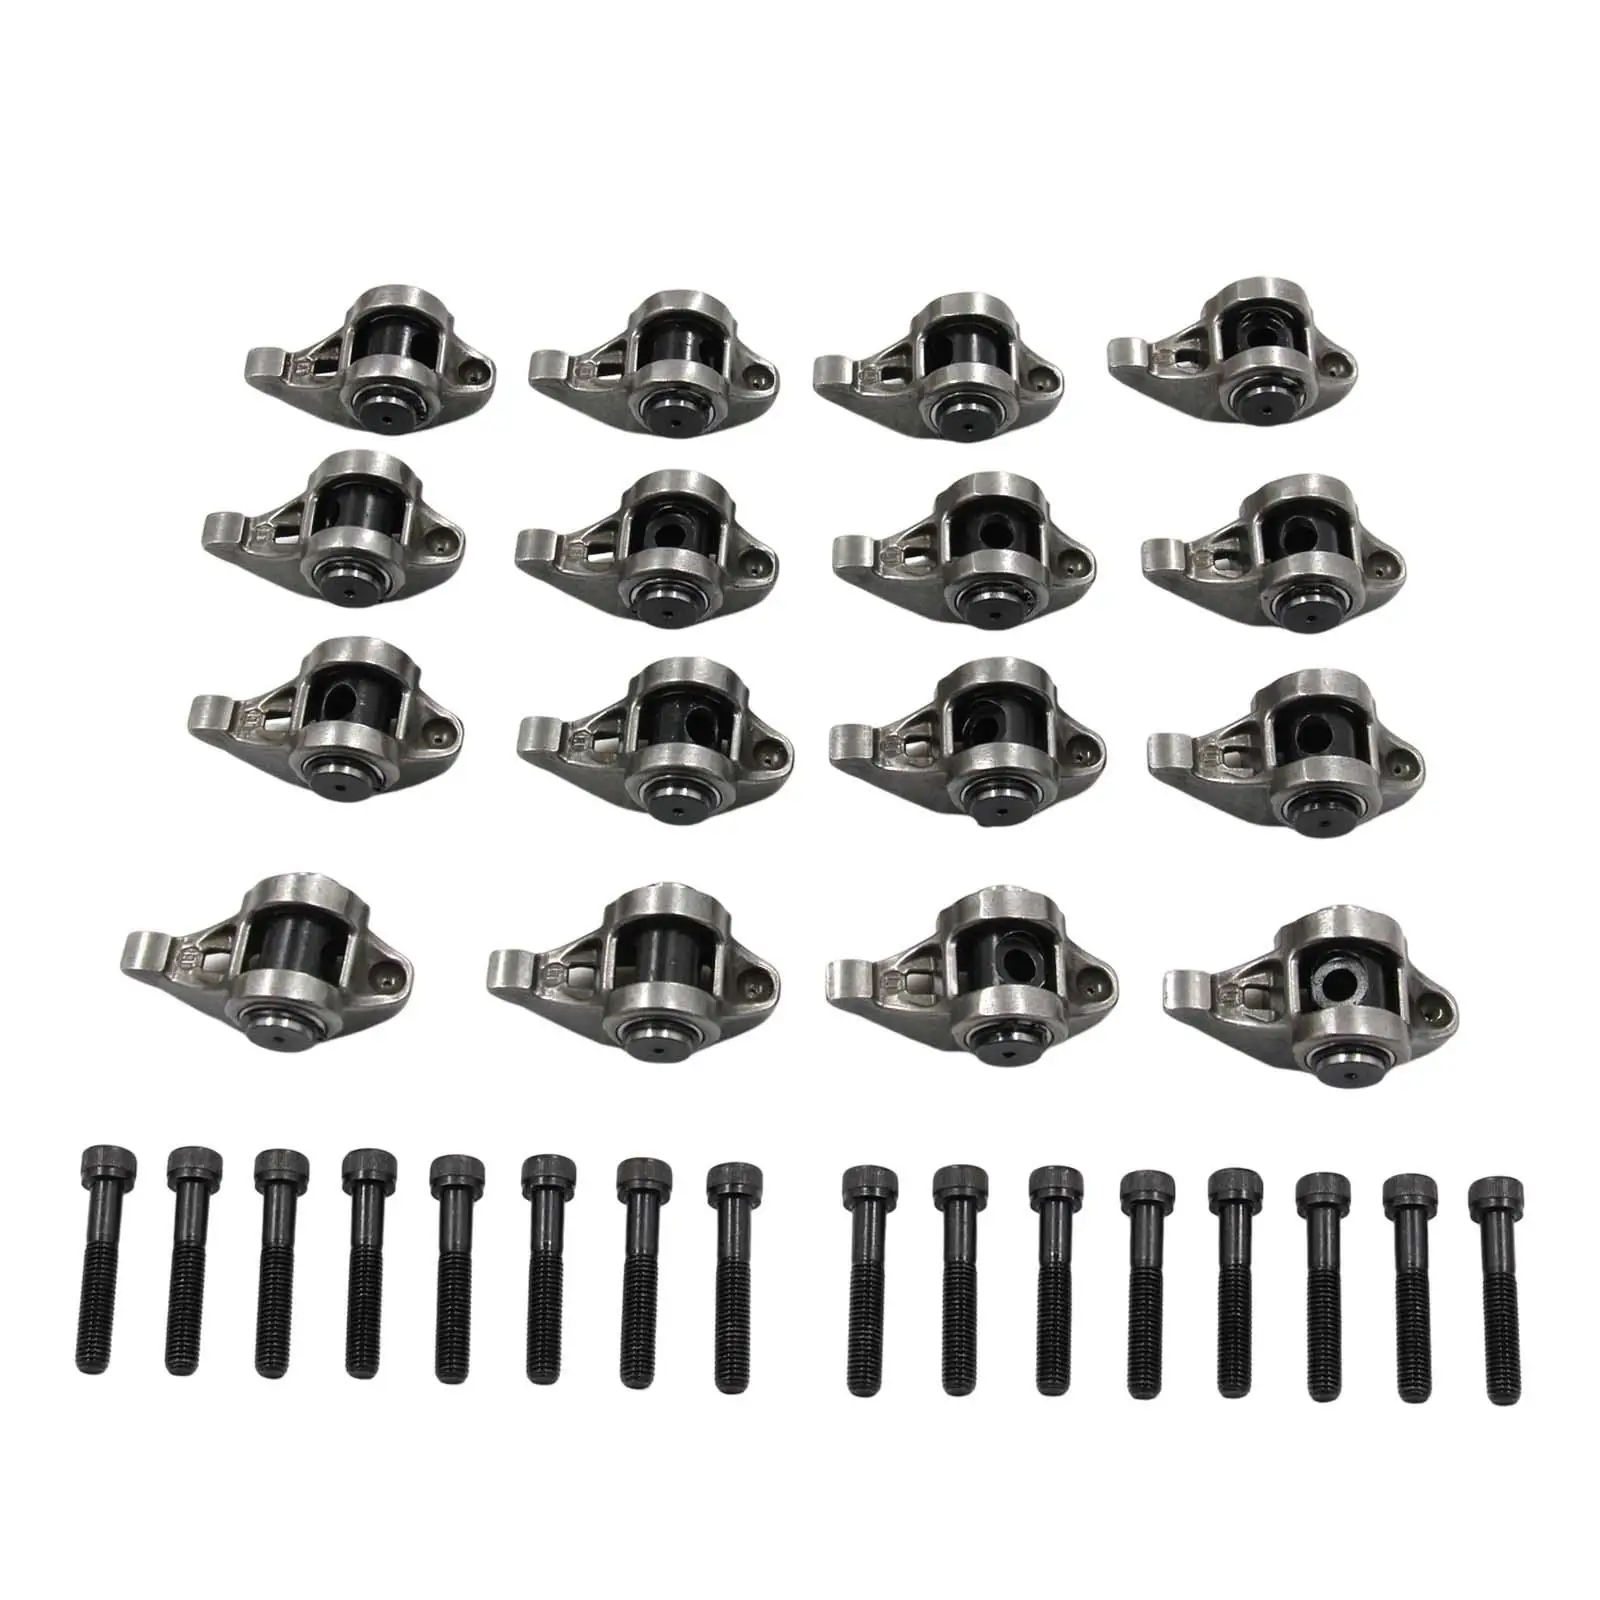 16Pcs Rocker Arms and Bolts Kit 10214664 High Quality Steel Accessory for LS1